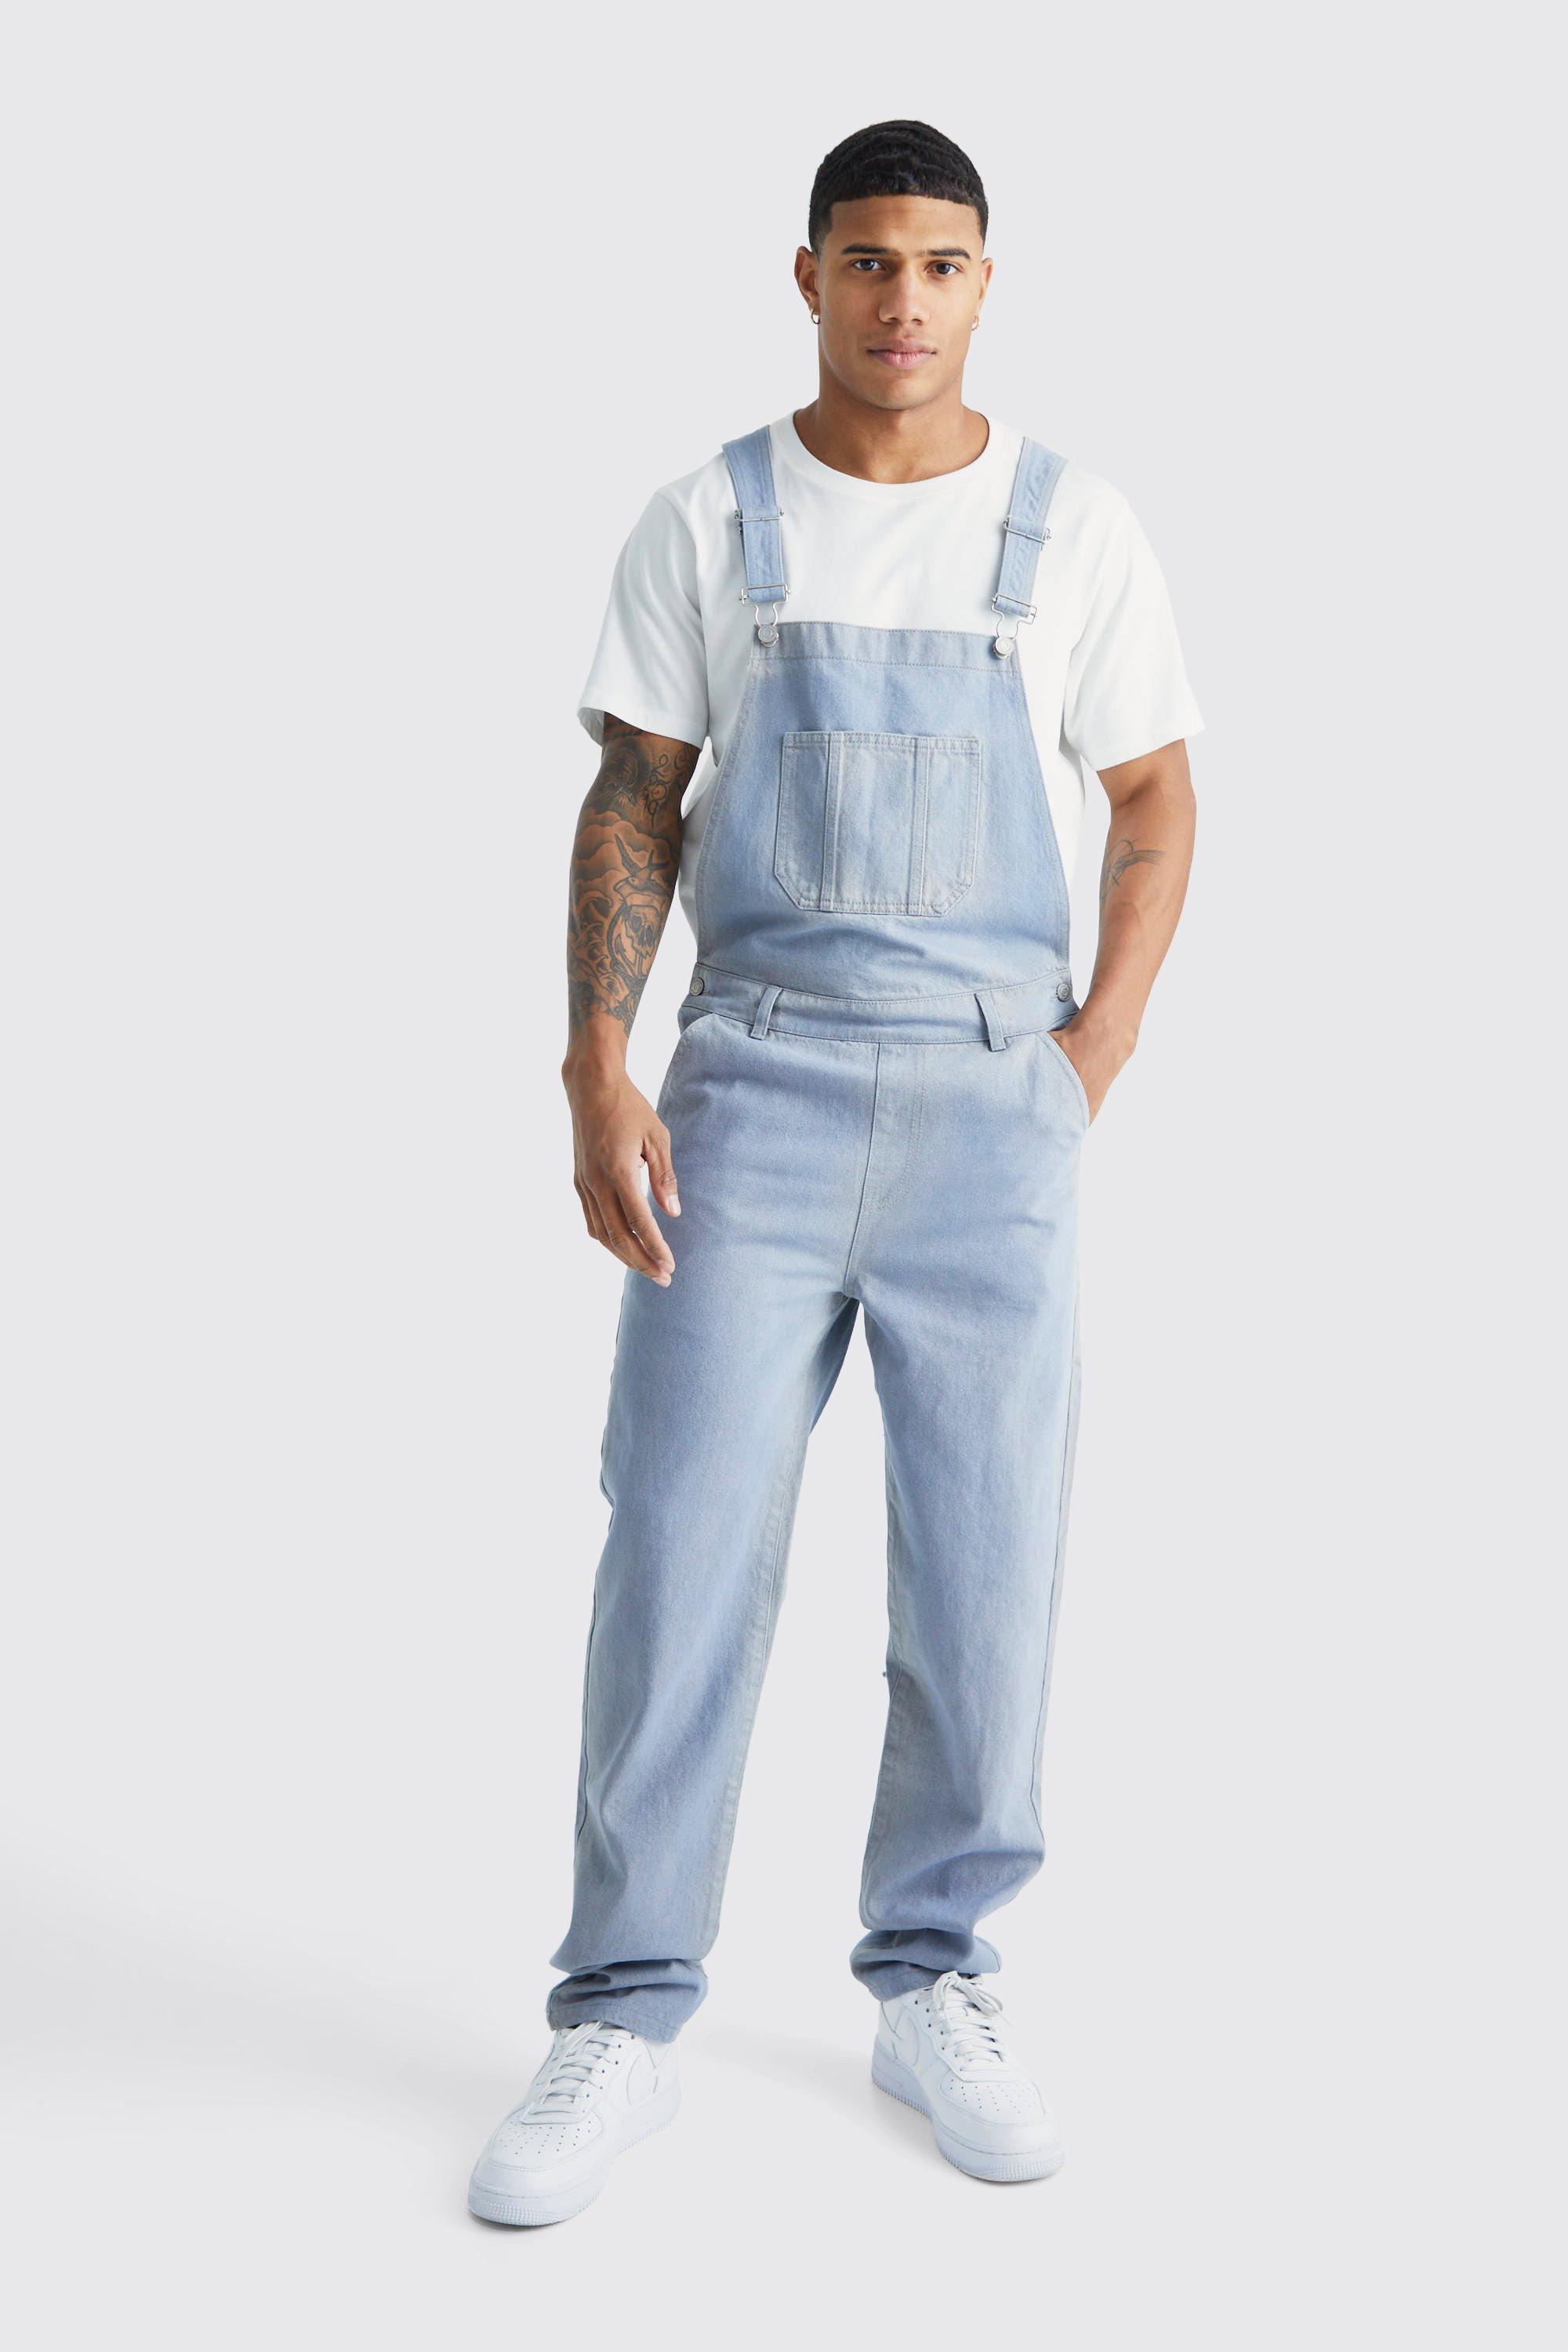 90s Outfits for Guys | Trendy, Party, Cool, Casual Mens Relaxed Washed Illusion Dungaree - Grey - M $90.00 AT vintagedancer.com